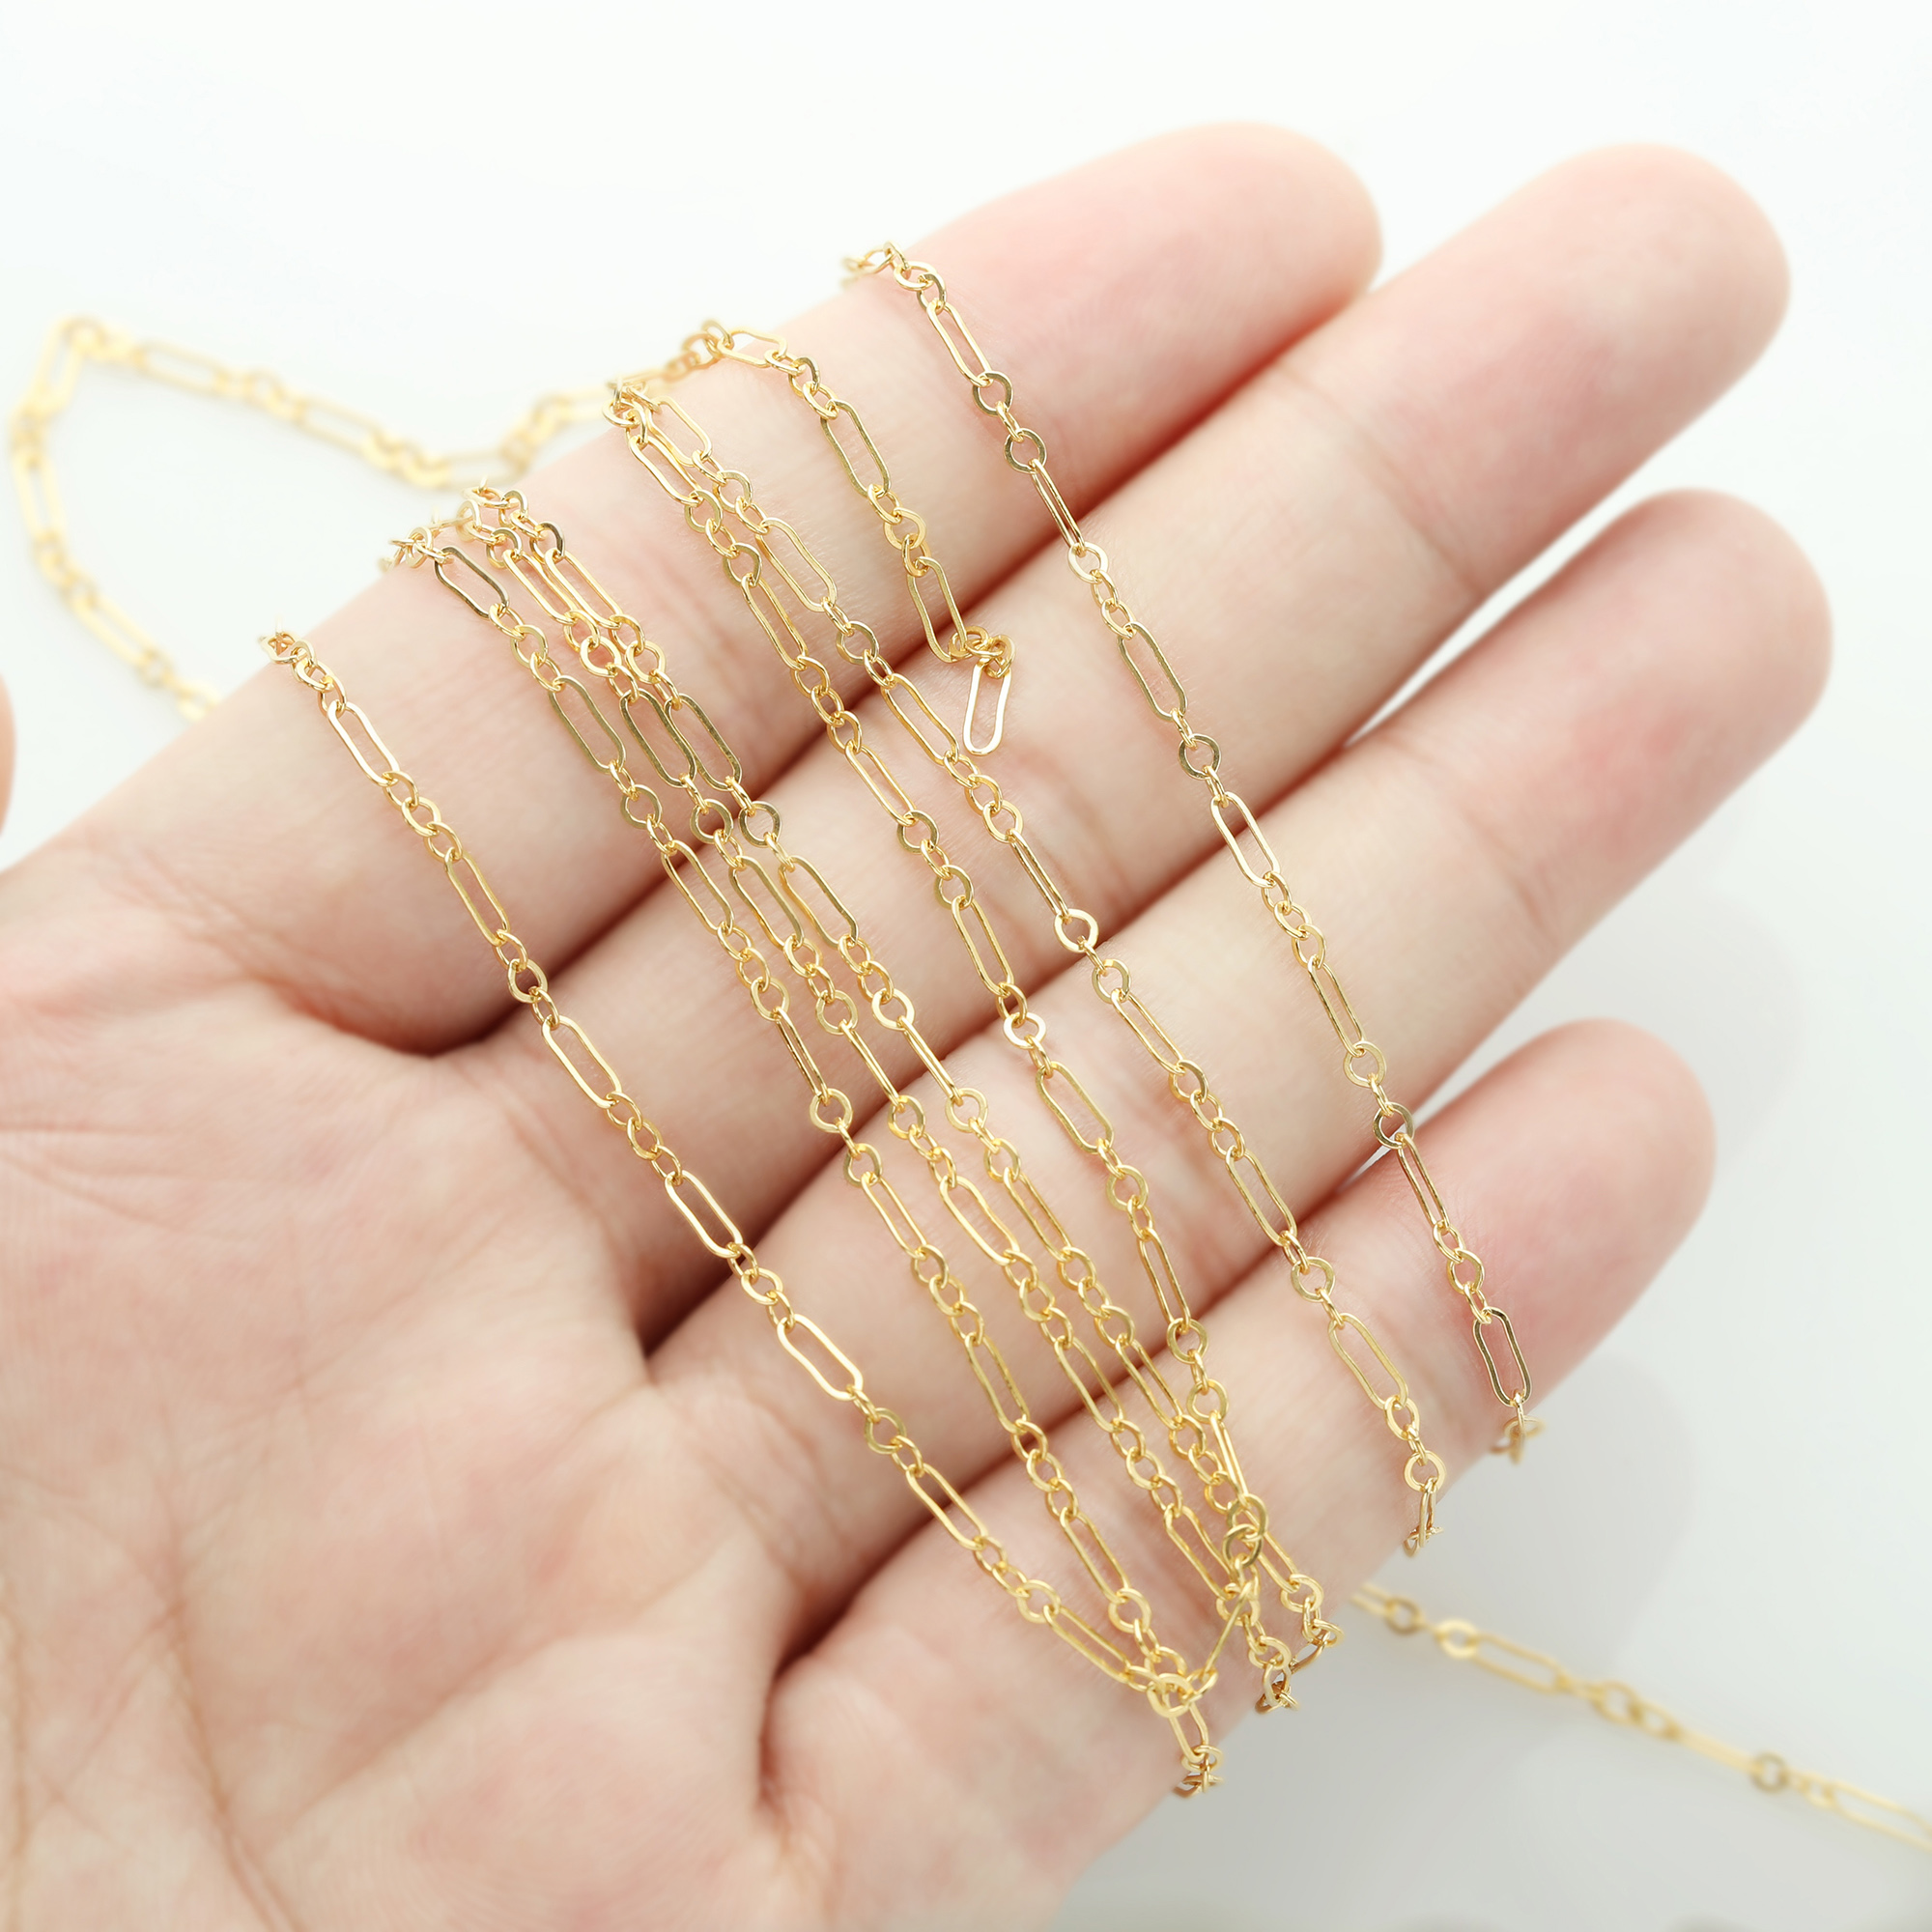 0.5Meter Oval Link Paperclip Chain Necklace,14k Gold Filled Necklace Chain,Simple Necklace Chain,DIY Necklace Supplies 1325013 - Click Image to Close